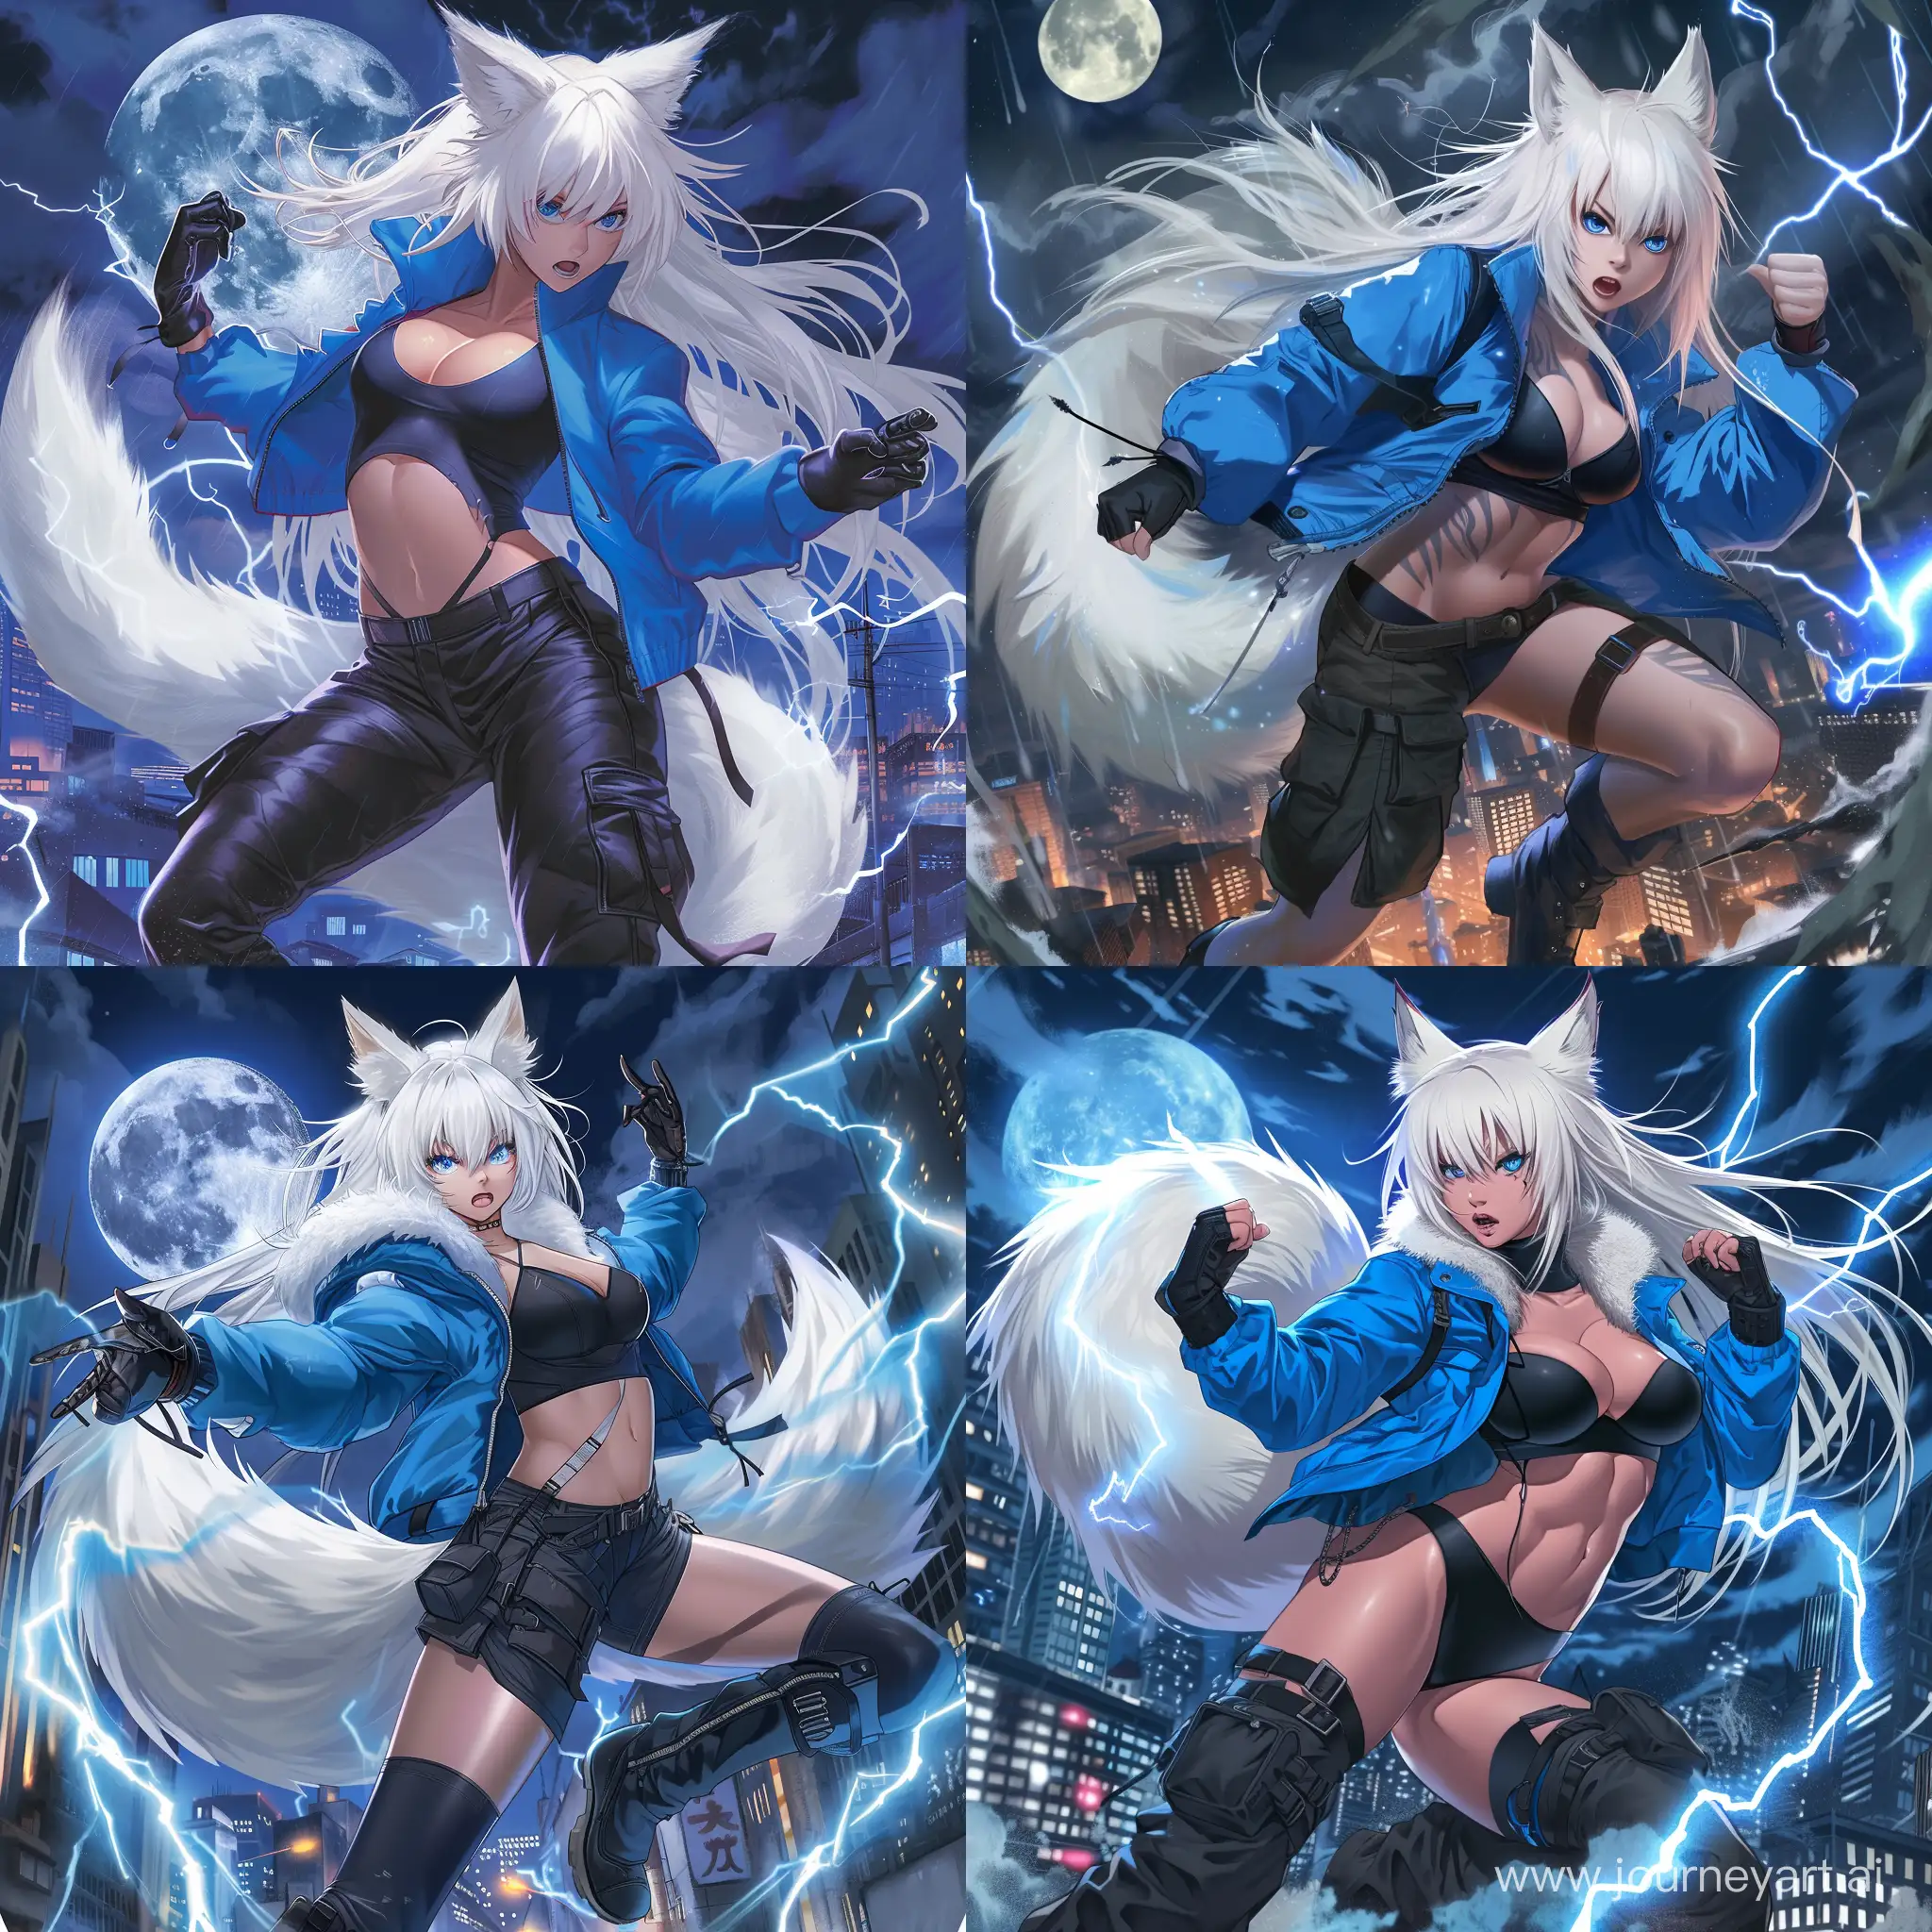 anime-style, full body, athletic, muscular, tan skin, adult, asian woman, long white hair, white fox ears, white fox tail attached to her waist, fierce blue eyes, blue jacket, black leotard, long baggy black cargo pants, black boots, fingerless black leather gloves, dynamic pose, city, night, full moon, fur collar, using lightning magic